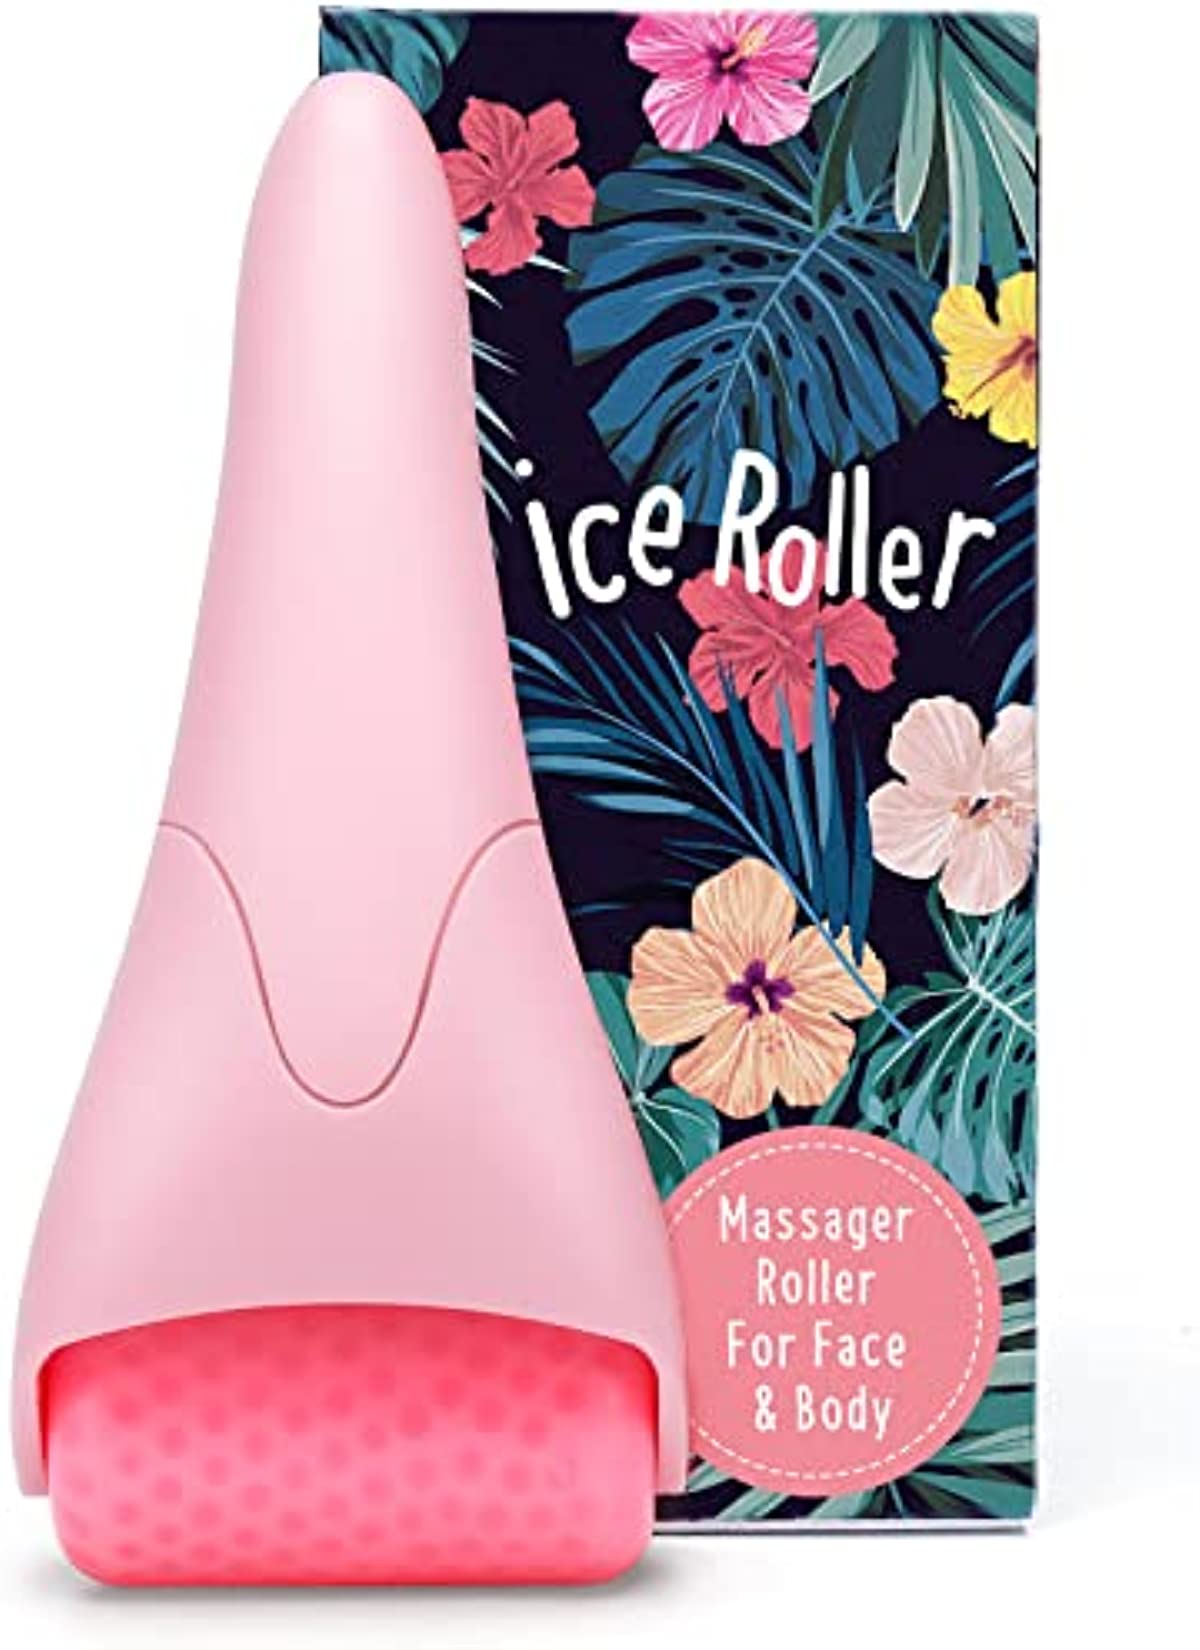 Dr. Pure Ice Roller for Face Massage, Face Roller for Reduce Puffiness Anti Wrinkle Migraine Pain Relief Tighten Skin, Face Icing Massager Cooling Facial Roller, Women Gifts Skin Care Tool